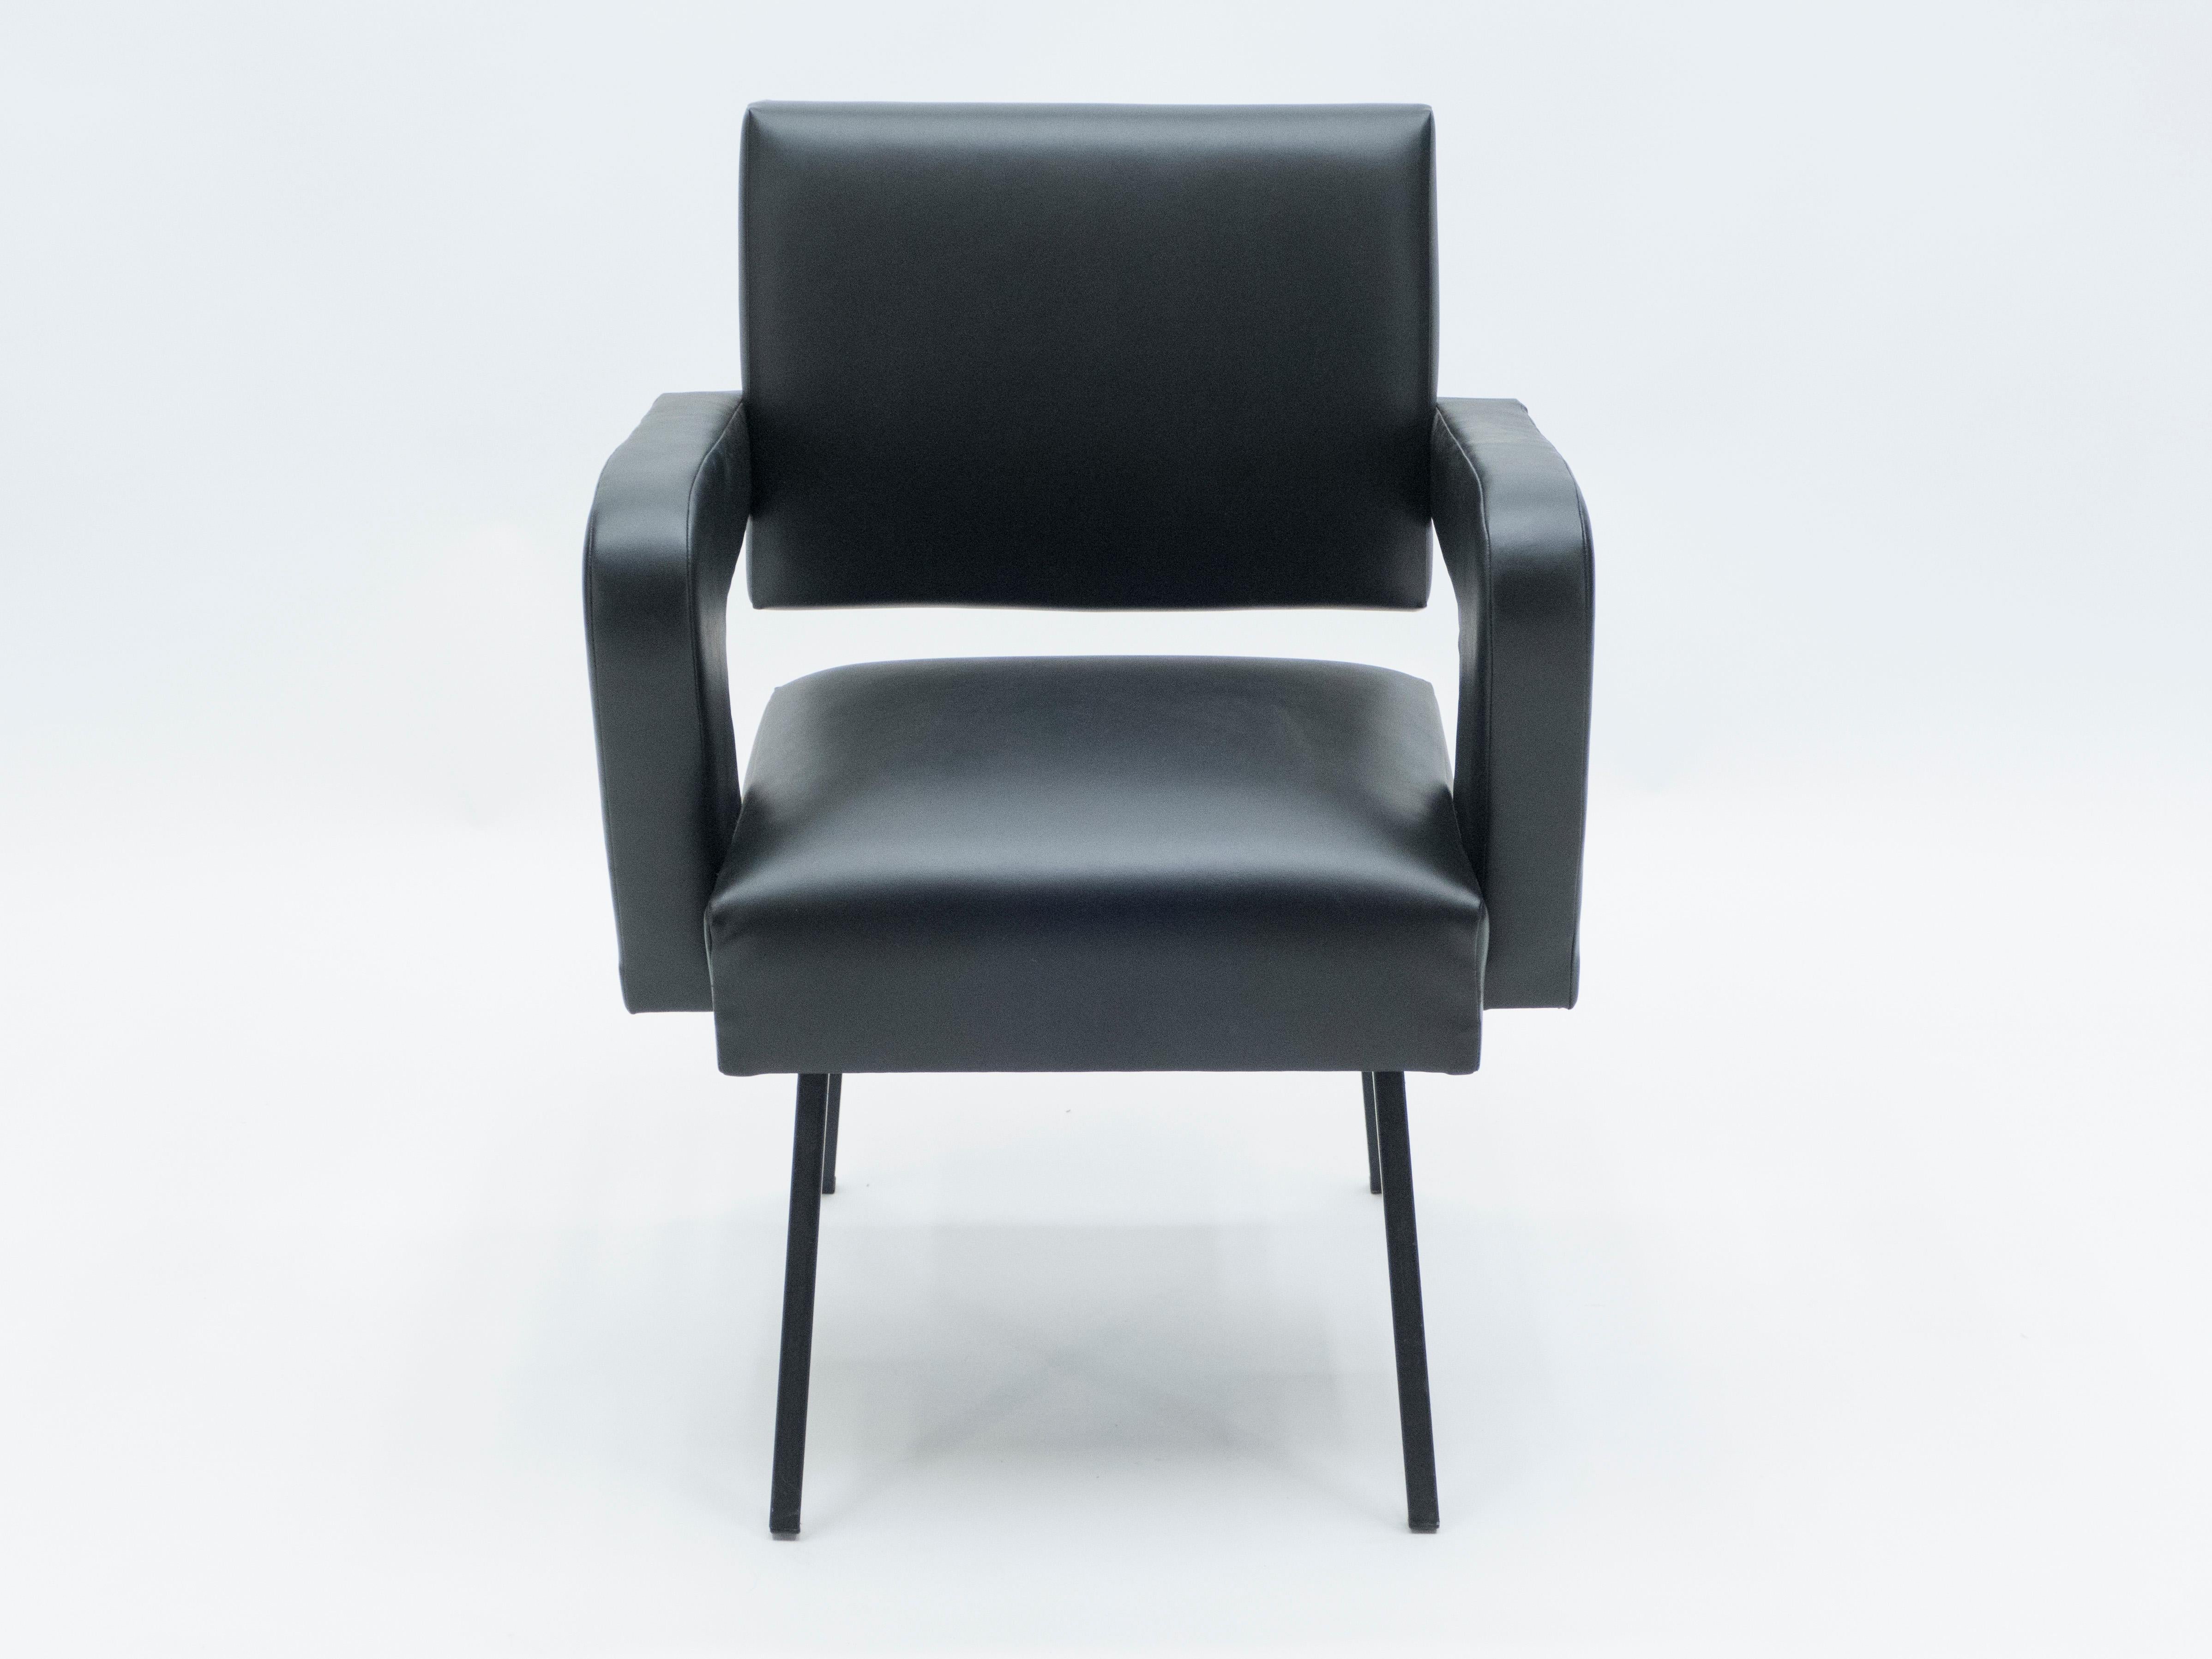 This desk armchair named President designed in 1959 by French designer Jacques Adnet is a rare, exciting find. Upholstered in high-quality leatherette, the chair is emblematic of Adnet’s philosophies in furniture design. It is exceedingly